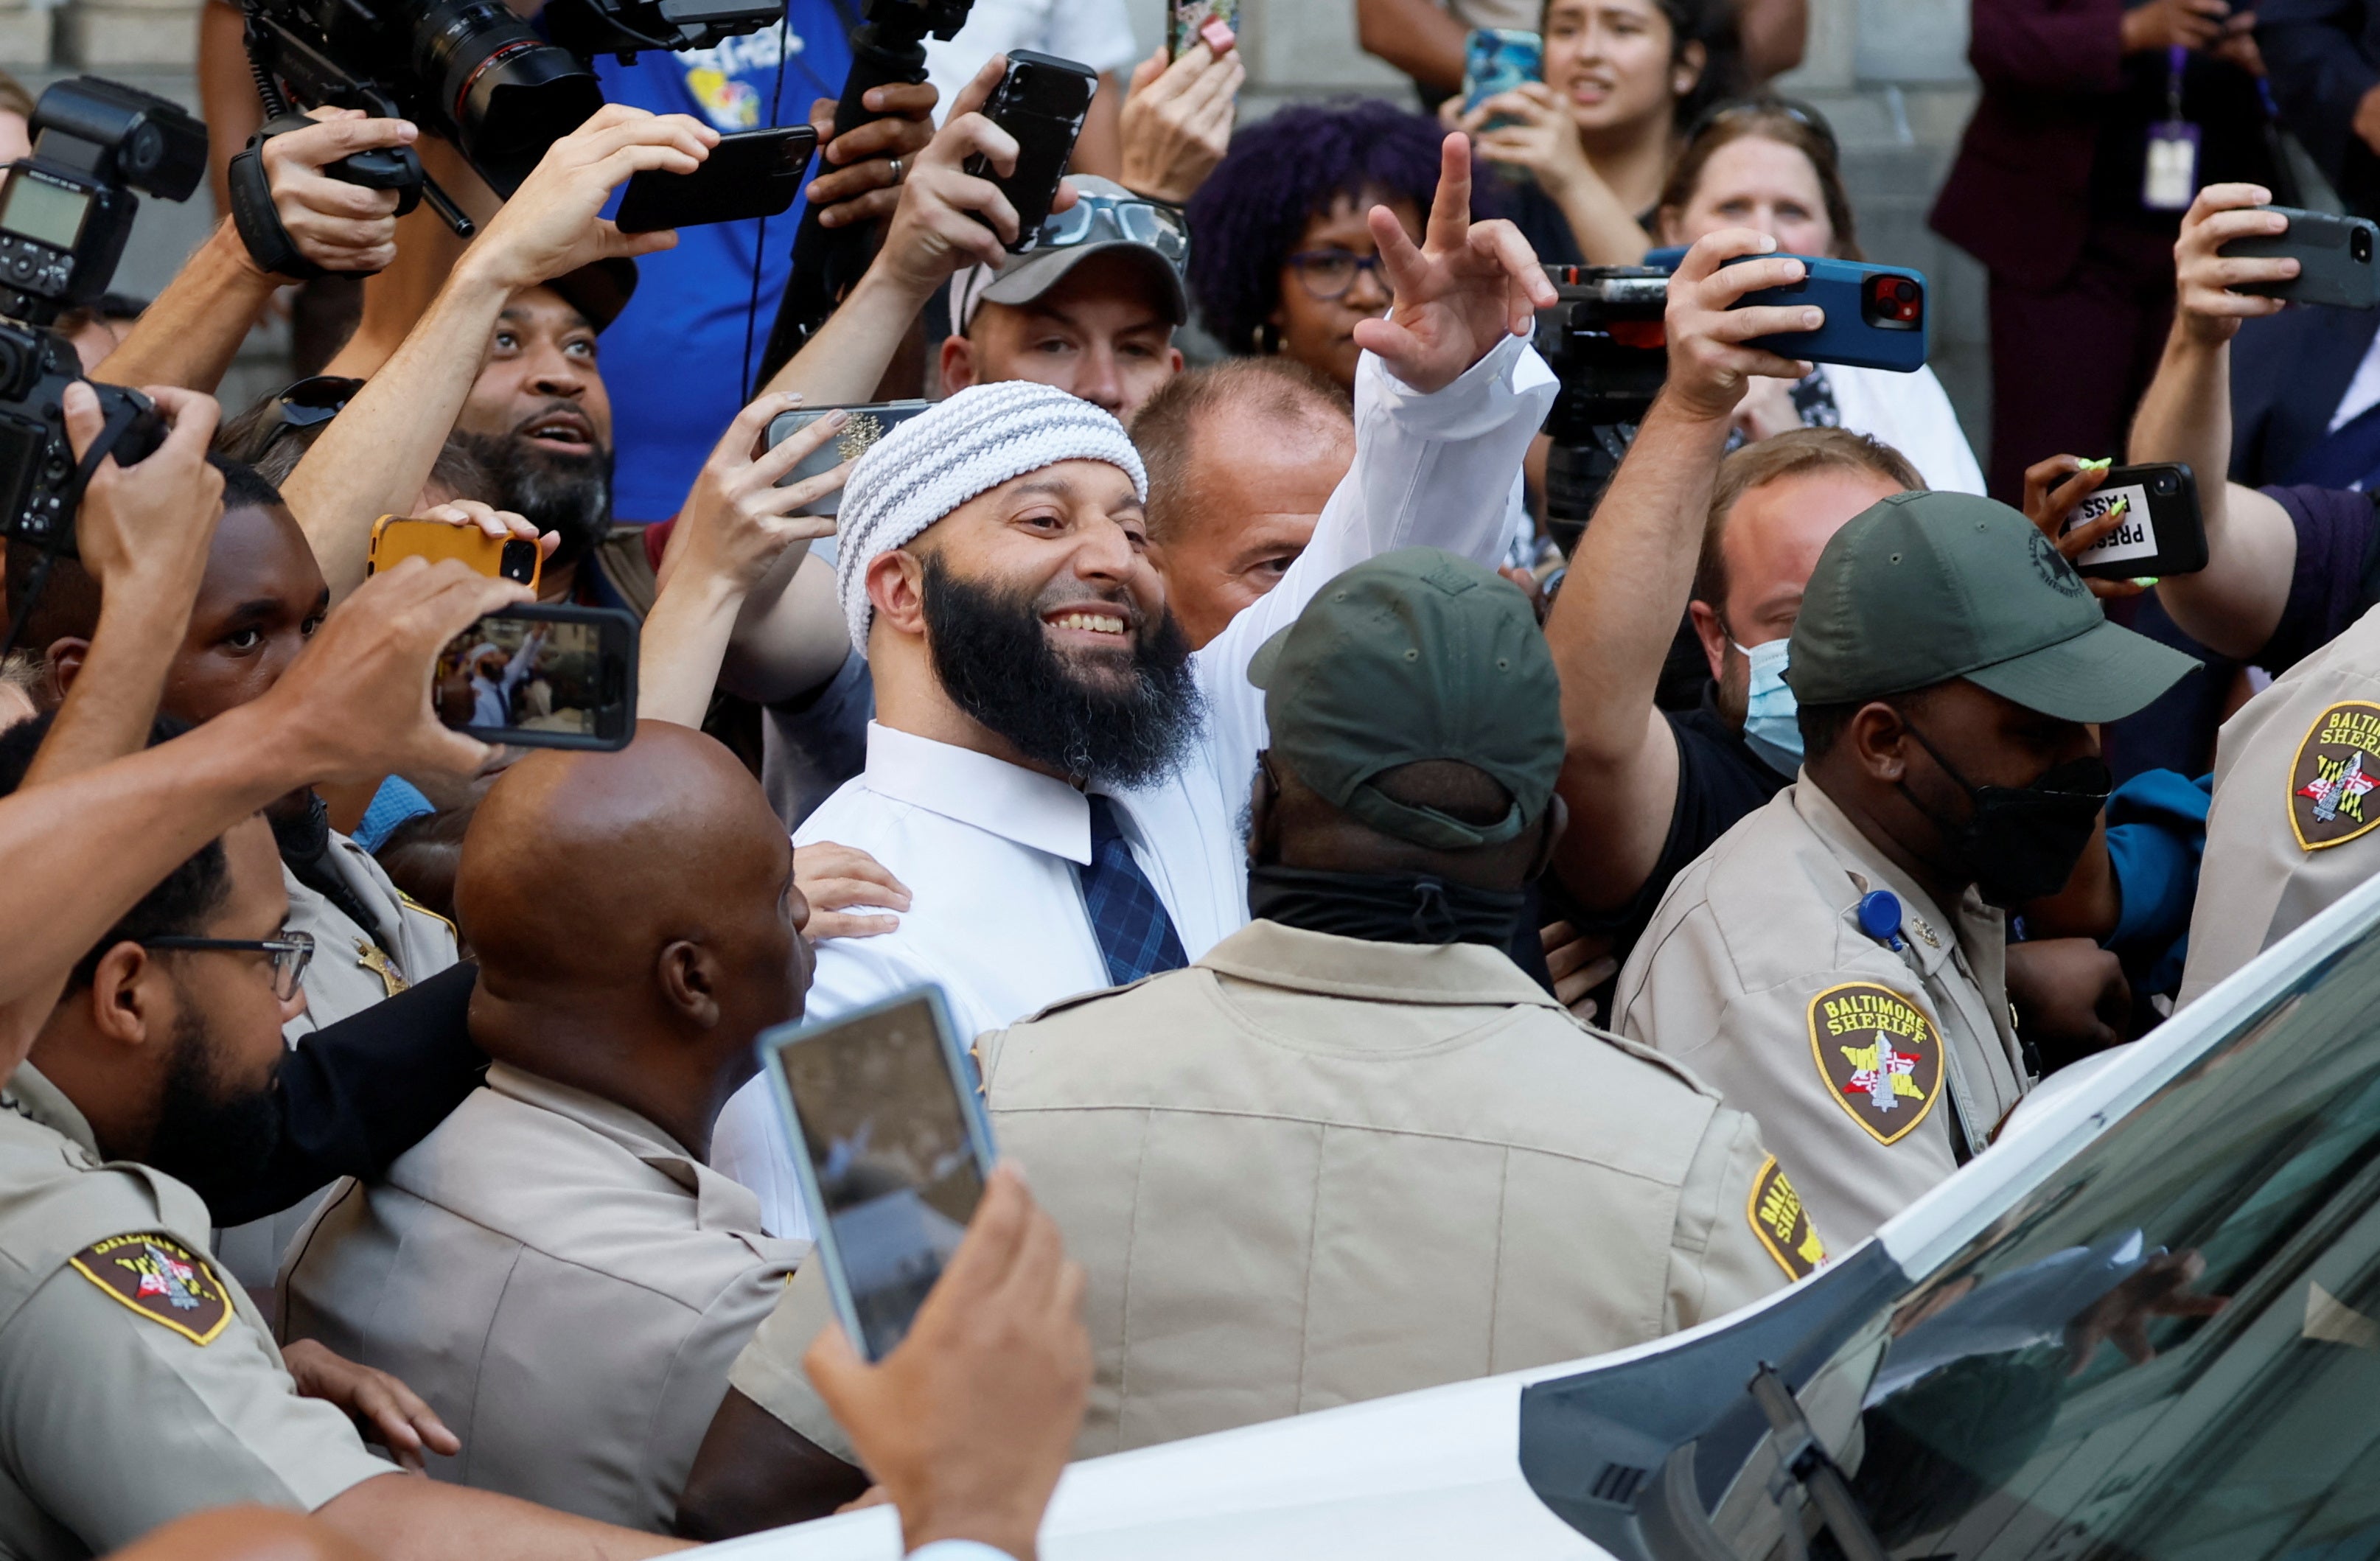 Adnan Syed flashes peace sign as he walks out of the courthouse on Monday